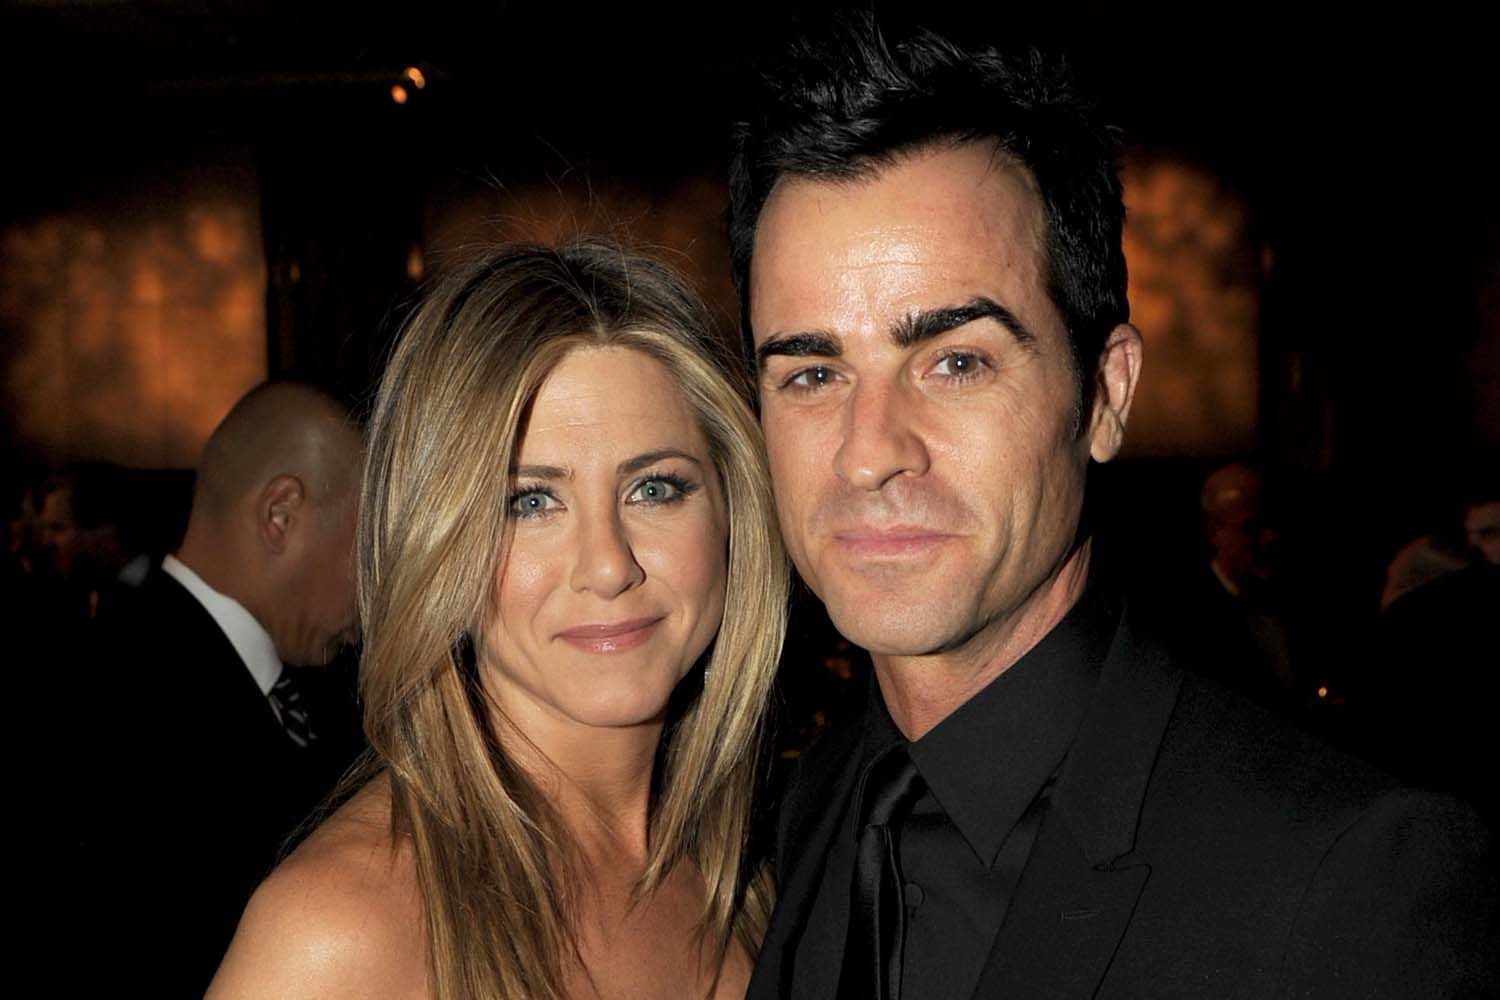 Jennifer Aniston And Justin Theroux Are Finally Married!